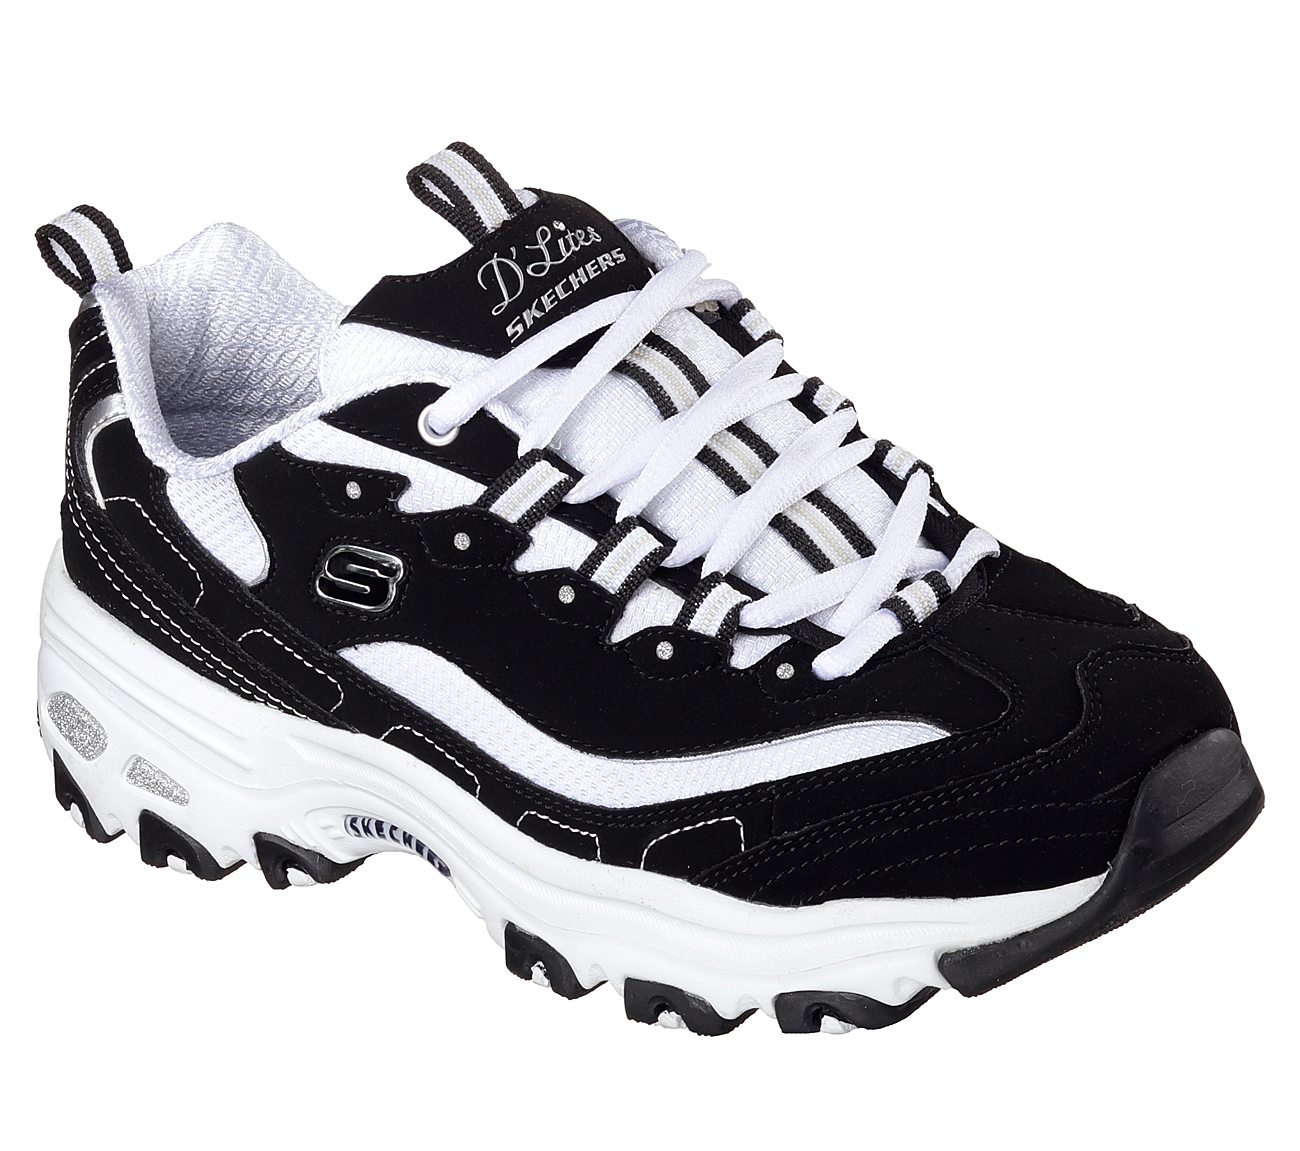 sketchers shoes hover to zoom GXUEHFC